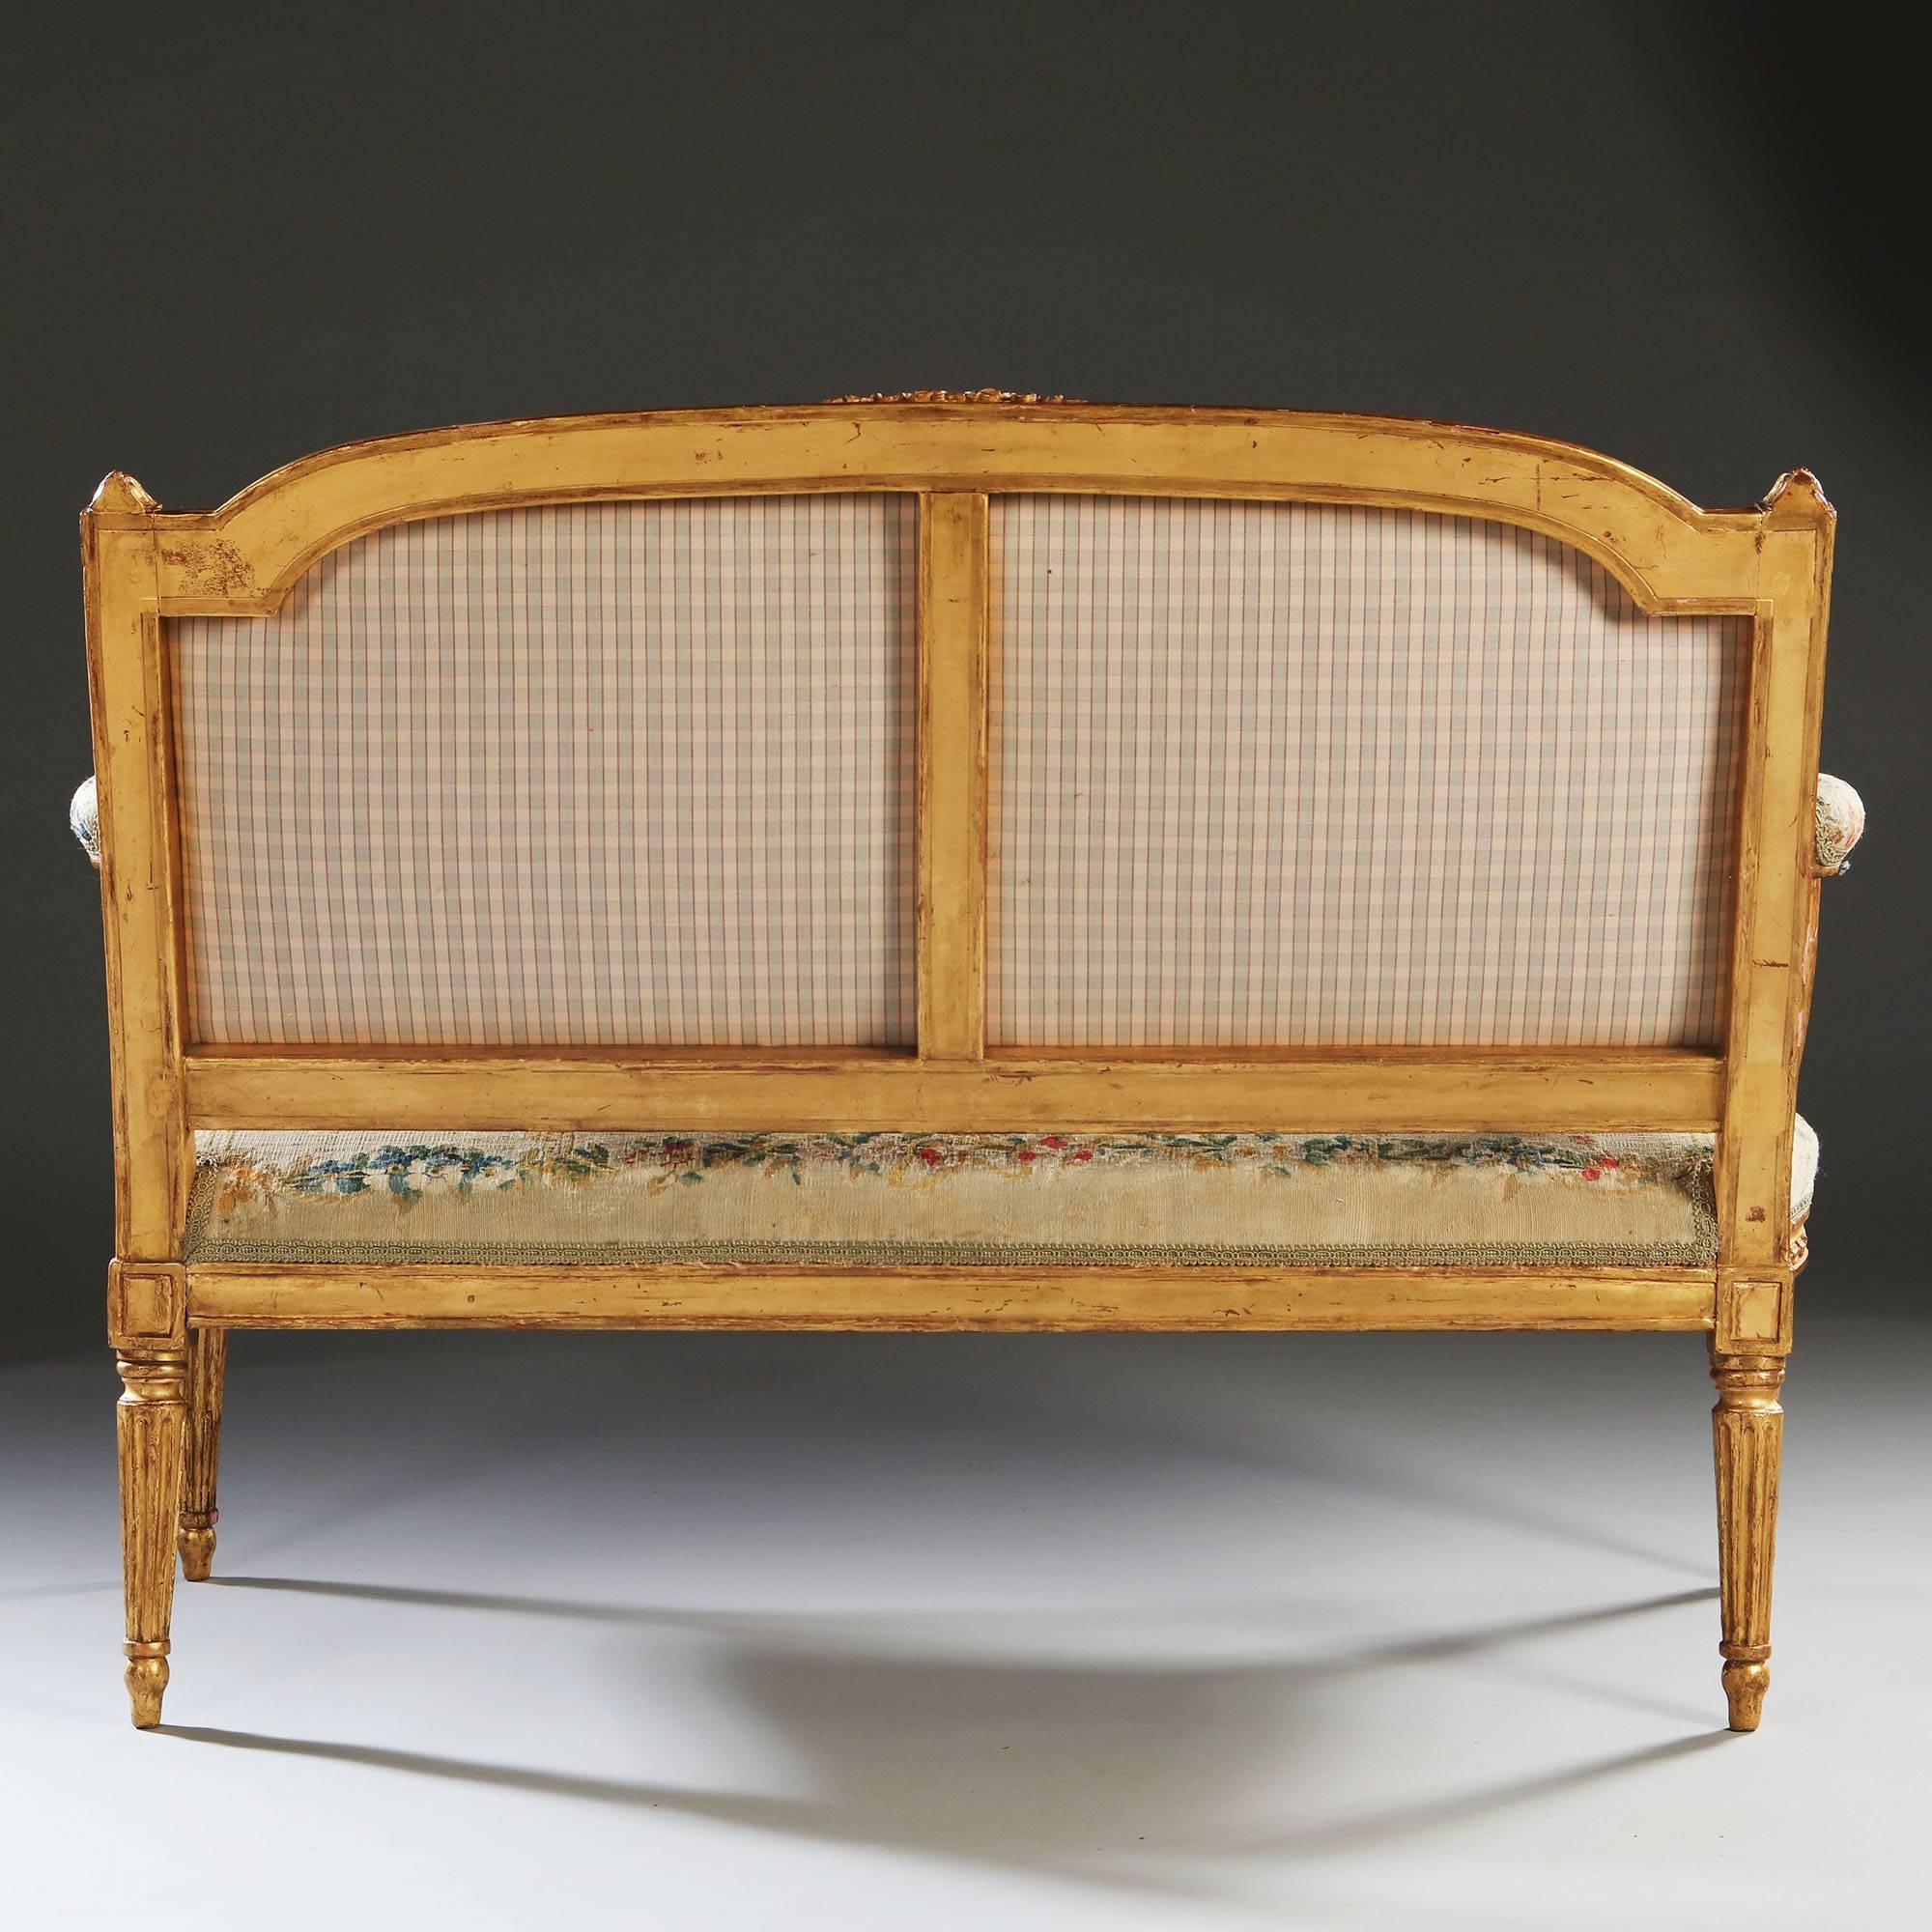 Pair of Giltwood Canapes, Louis XVI, 18th Century, Stamped Pierre Laroque 1